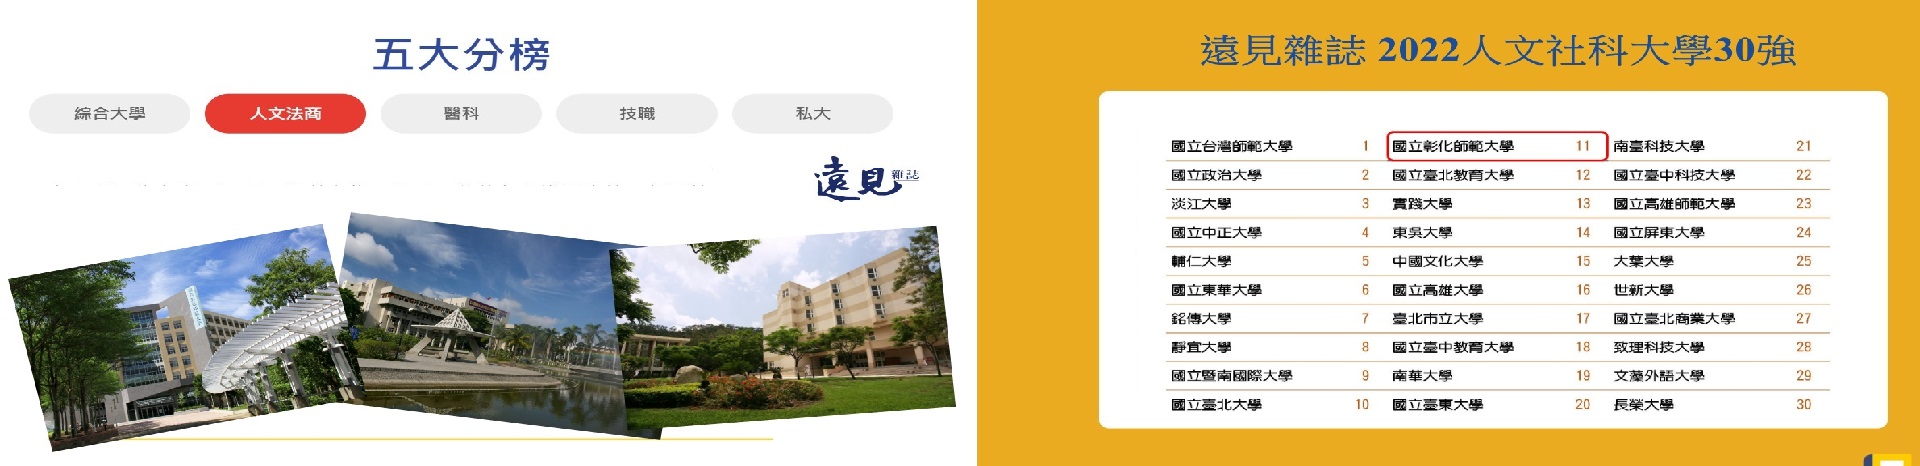 NCUE Ranked 11th in Top Taiwan's Universities for Humanities and Social Sciences